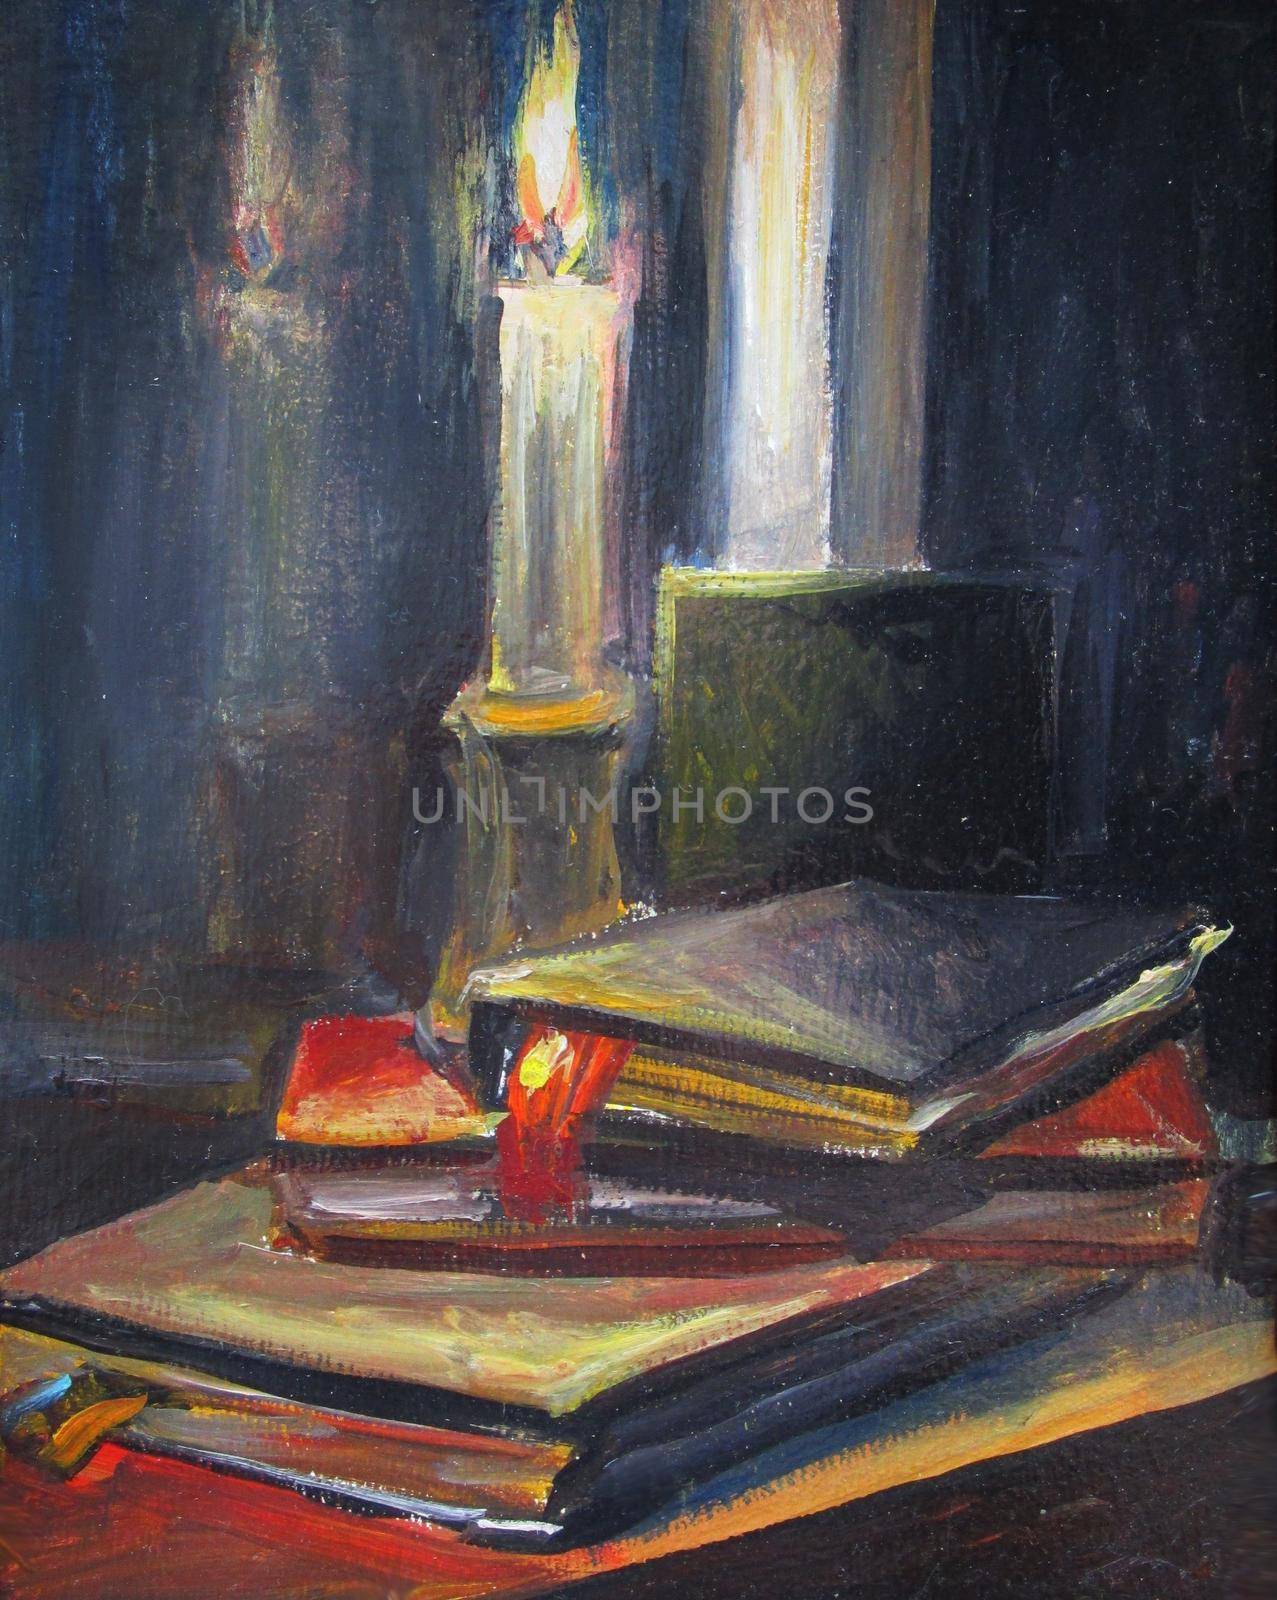 Burning candle and old books, painting